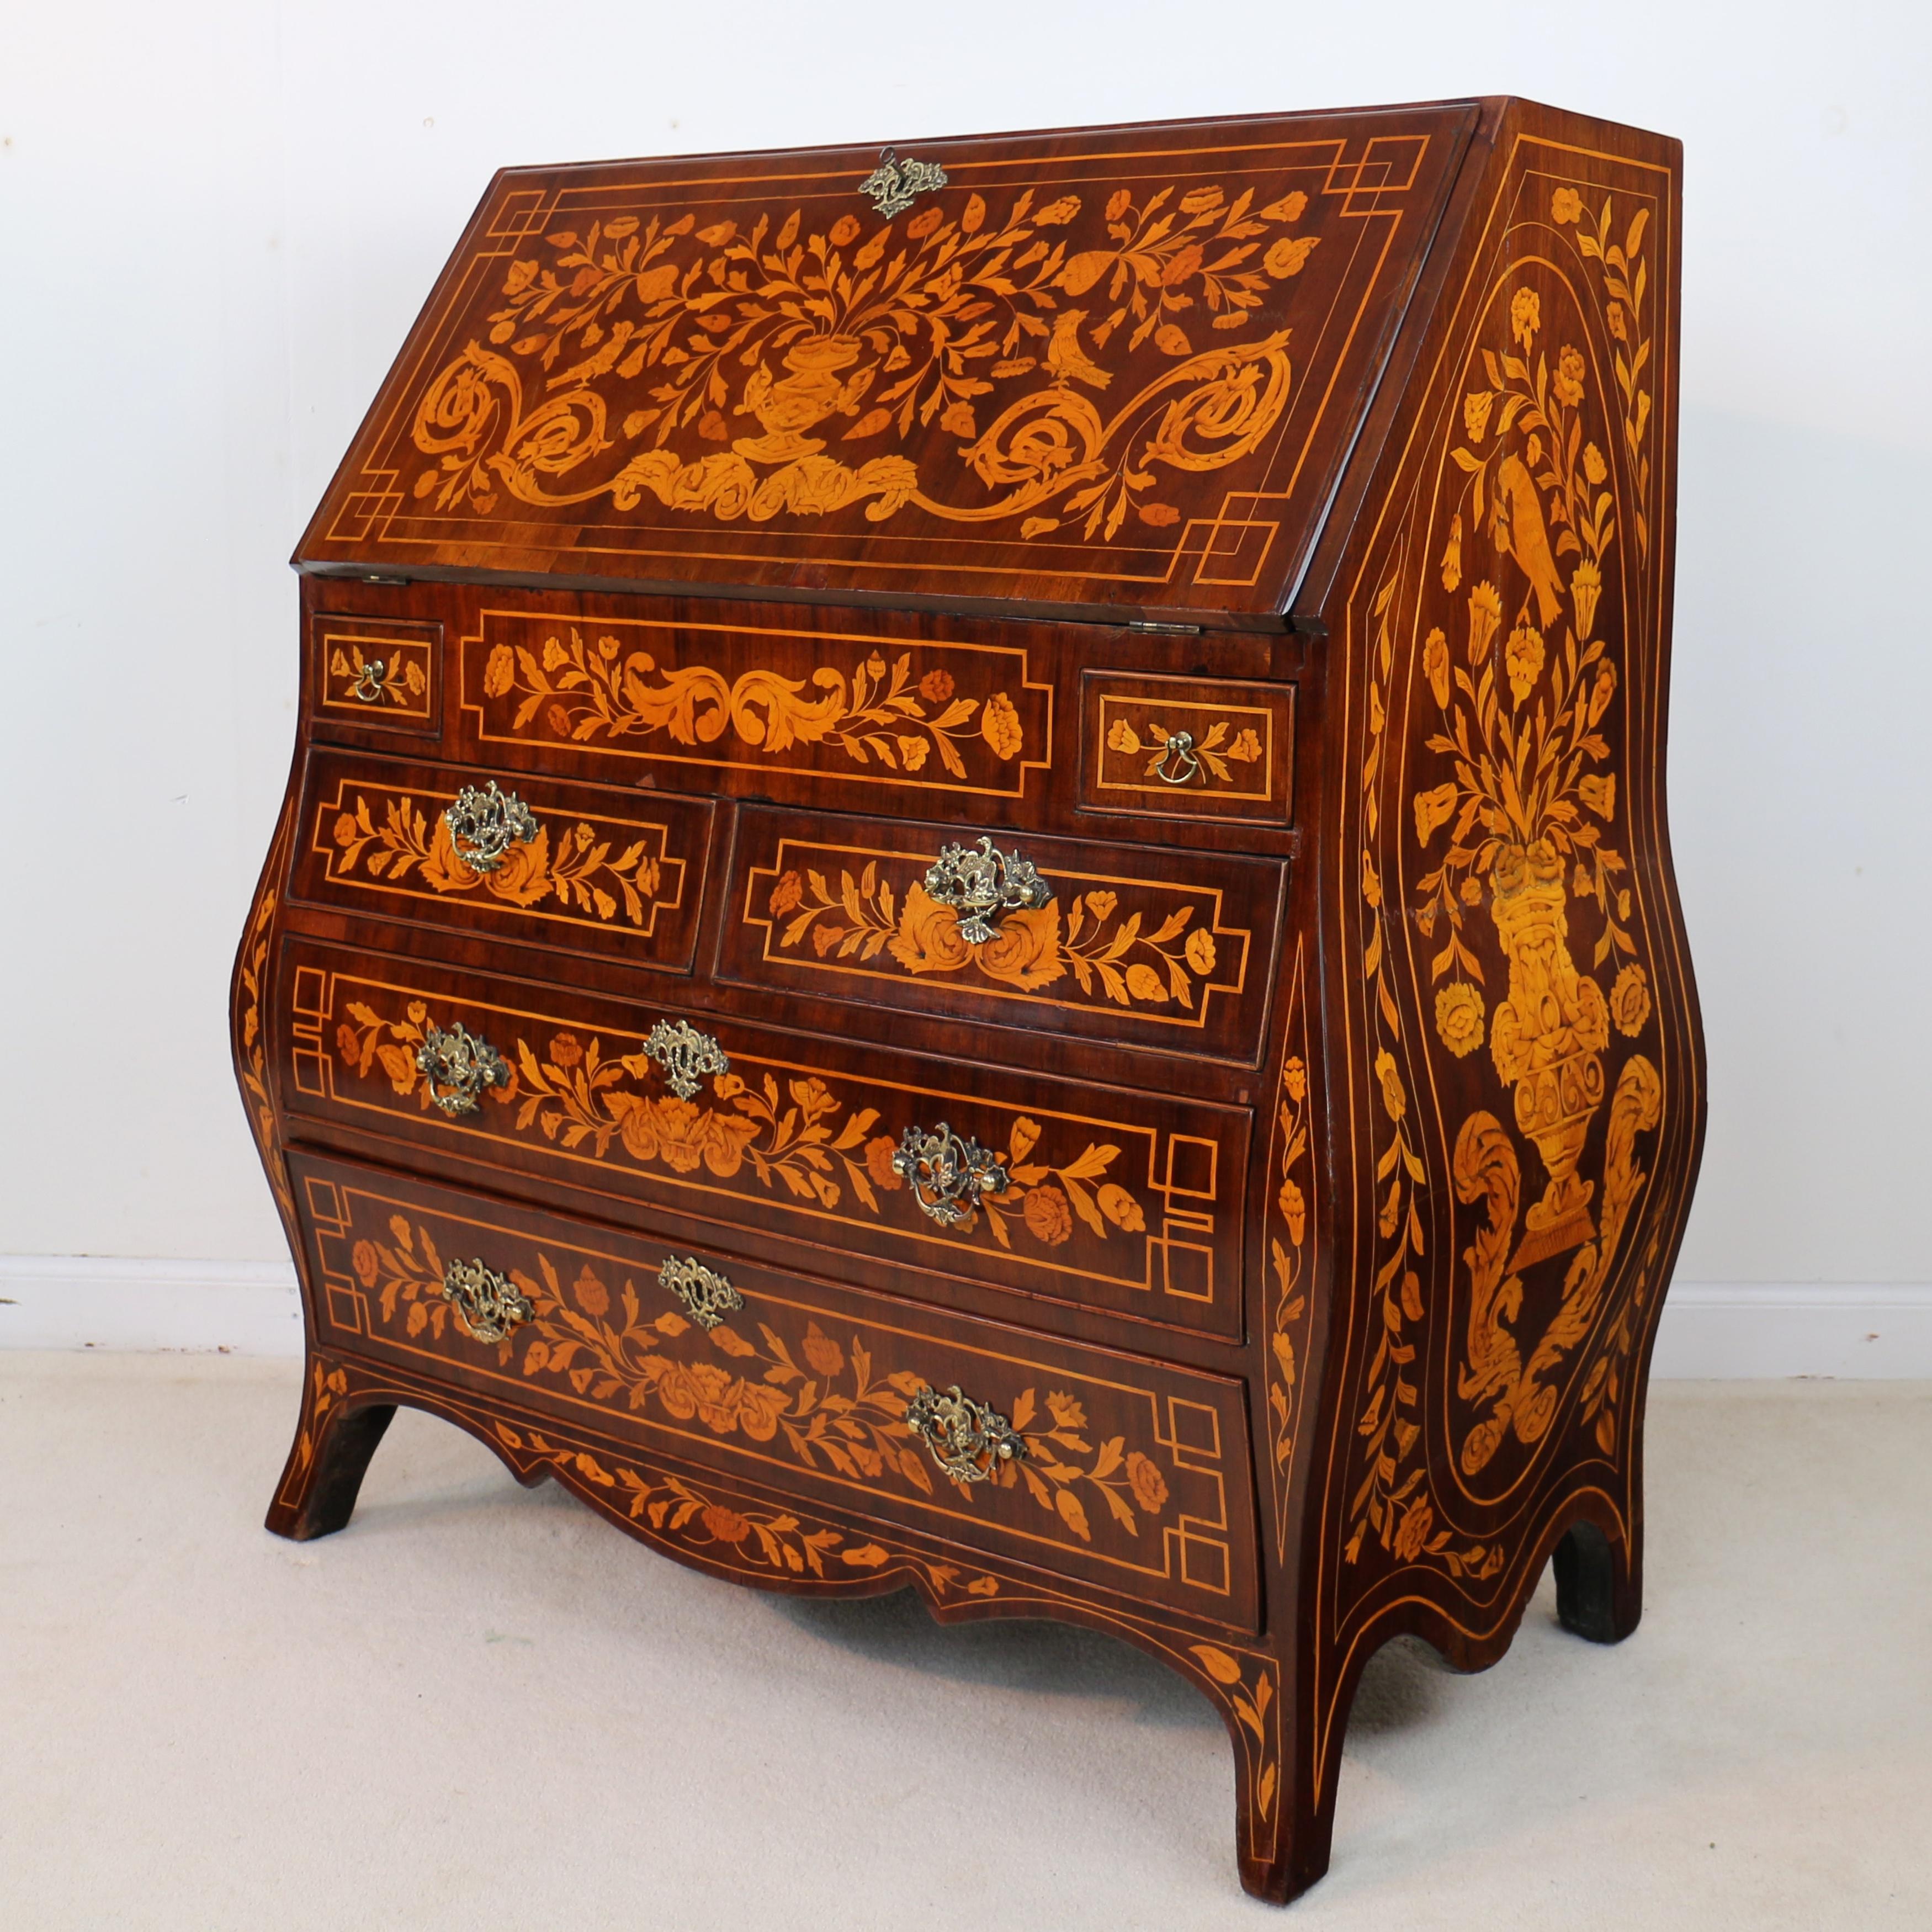 A 19th century Dutch marquetry inlaid bombé bureau profusely decorated all-over with marquetry depictions of flowers, urns and birds. With a rectangular flap opening to reveal a striking floral marquetry stepped fitted interior with a well, two